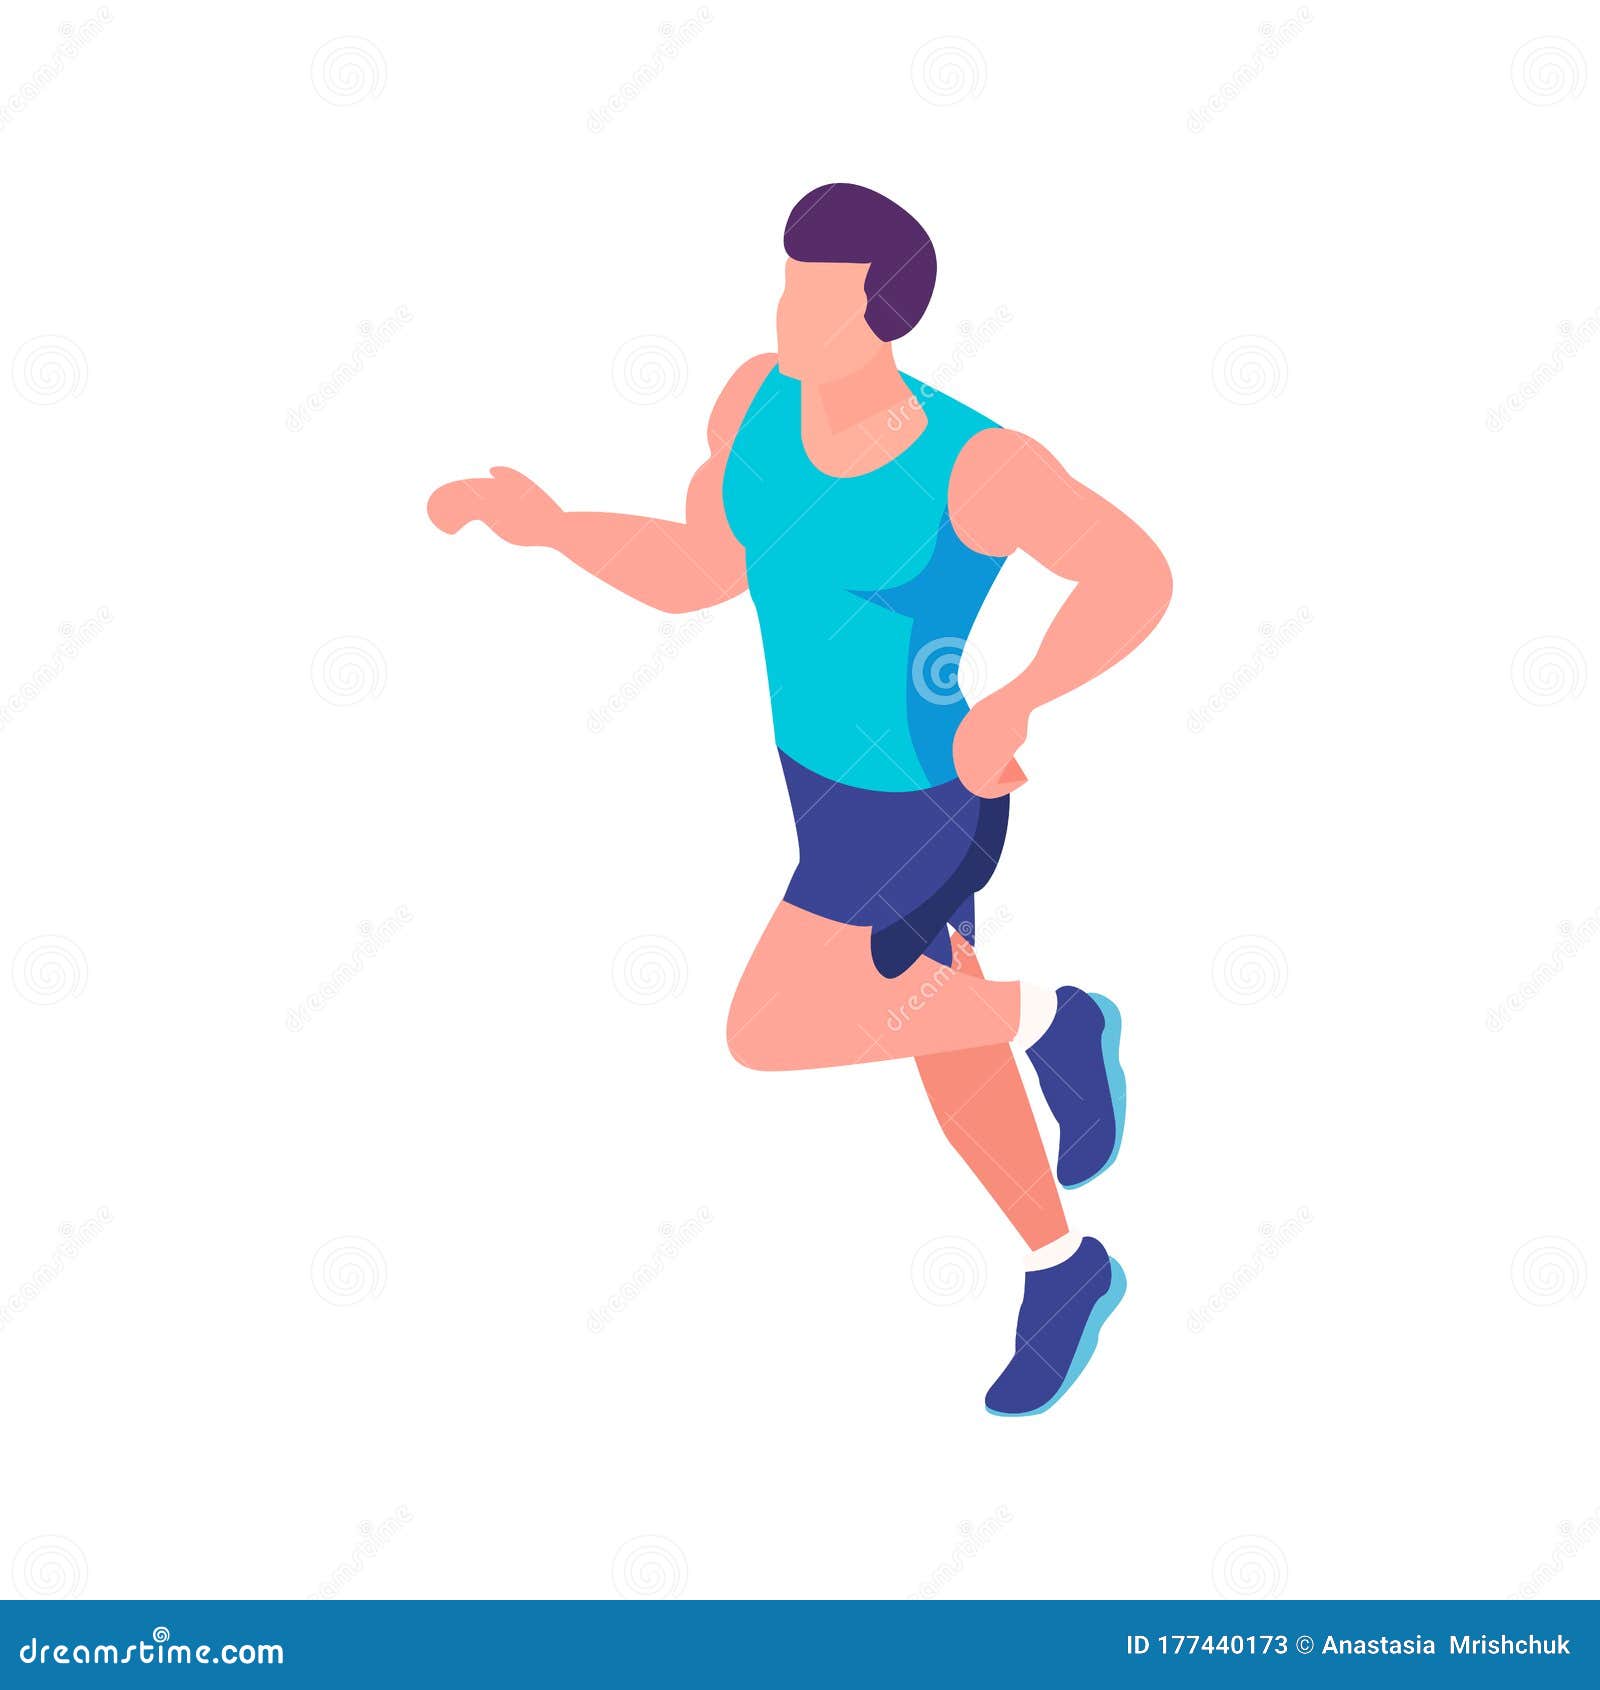 The Guy is Running. Picture on a White Background. Vector Illustration ...